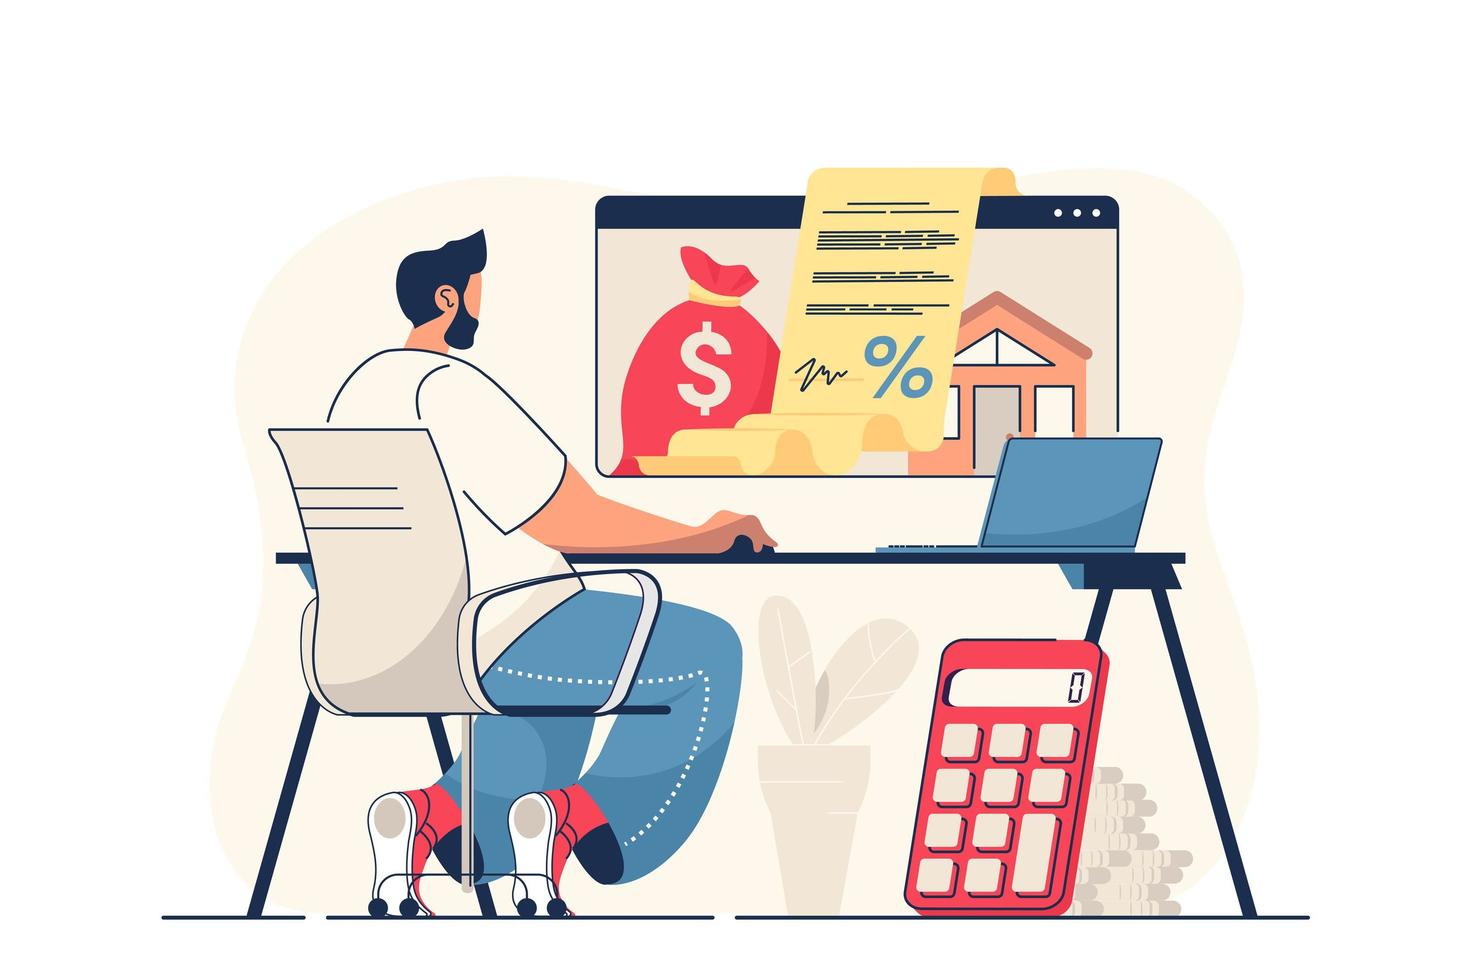 Mortgage concept for web banner. Man takes out mortgage online, signs contract with bank to buy new house, modern person scene. Vector illustration in flat cartoon design with people characters